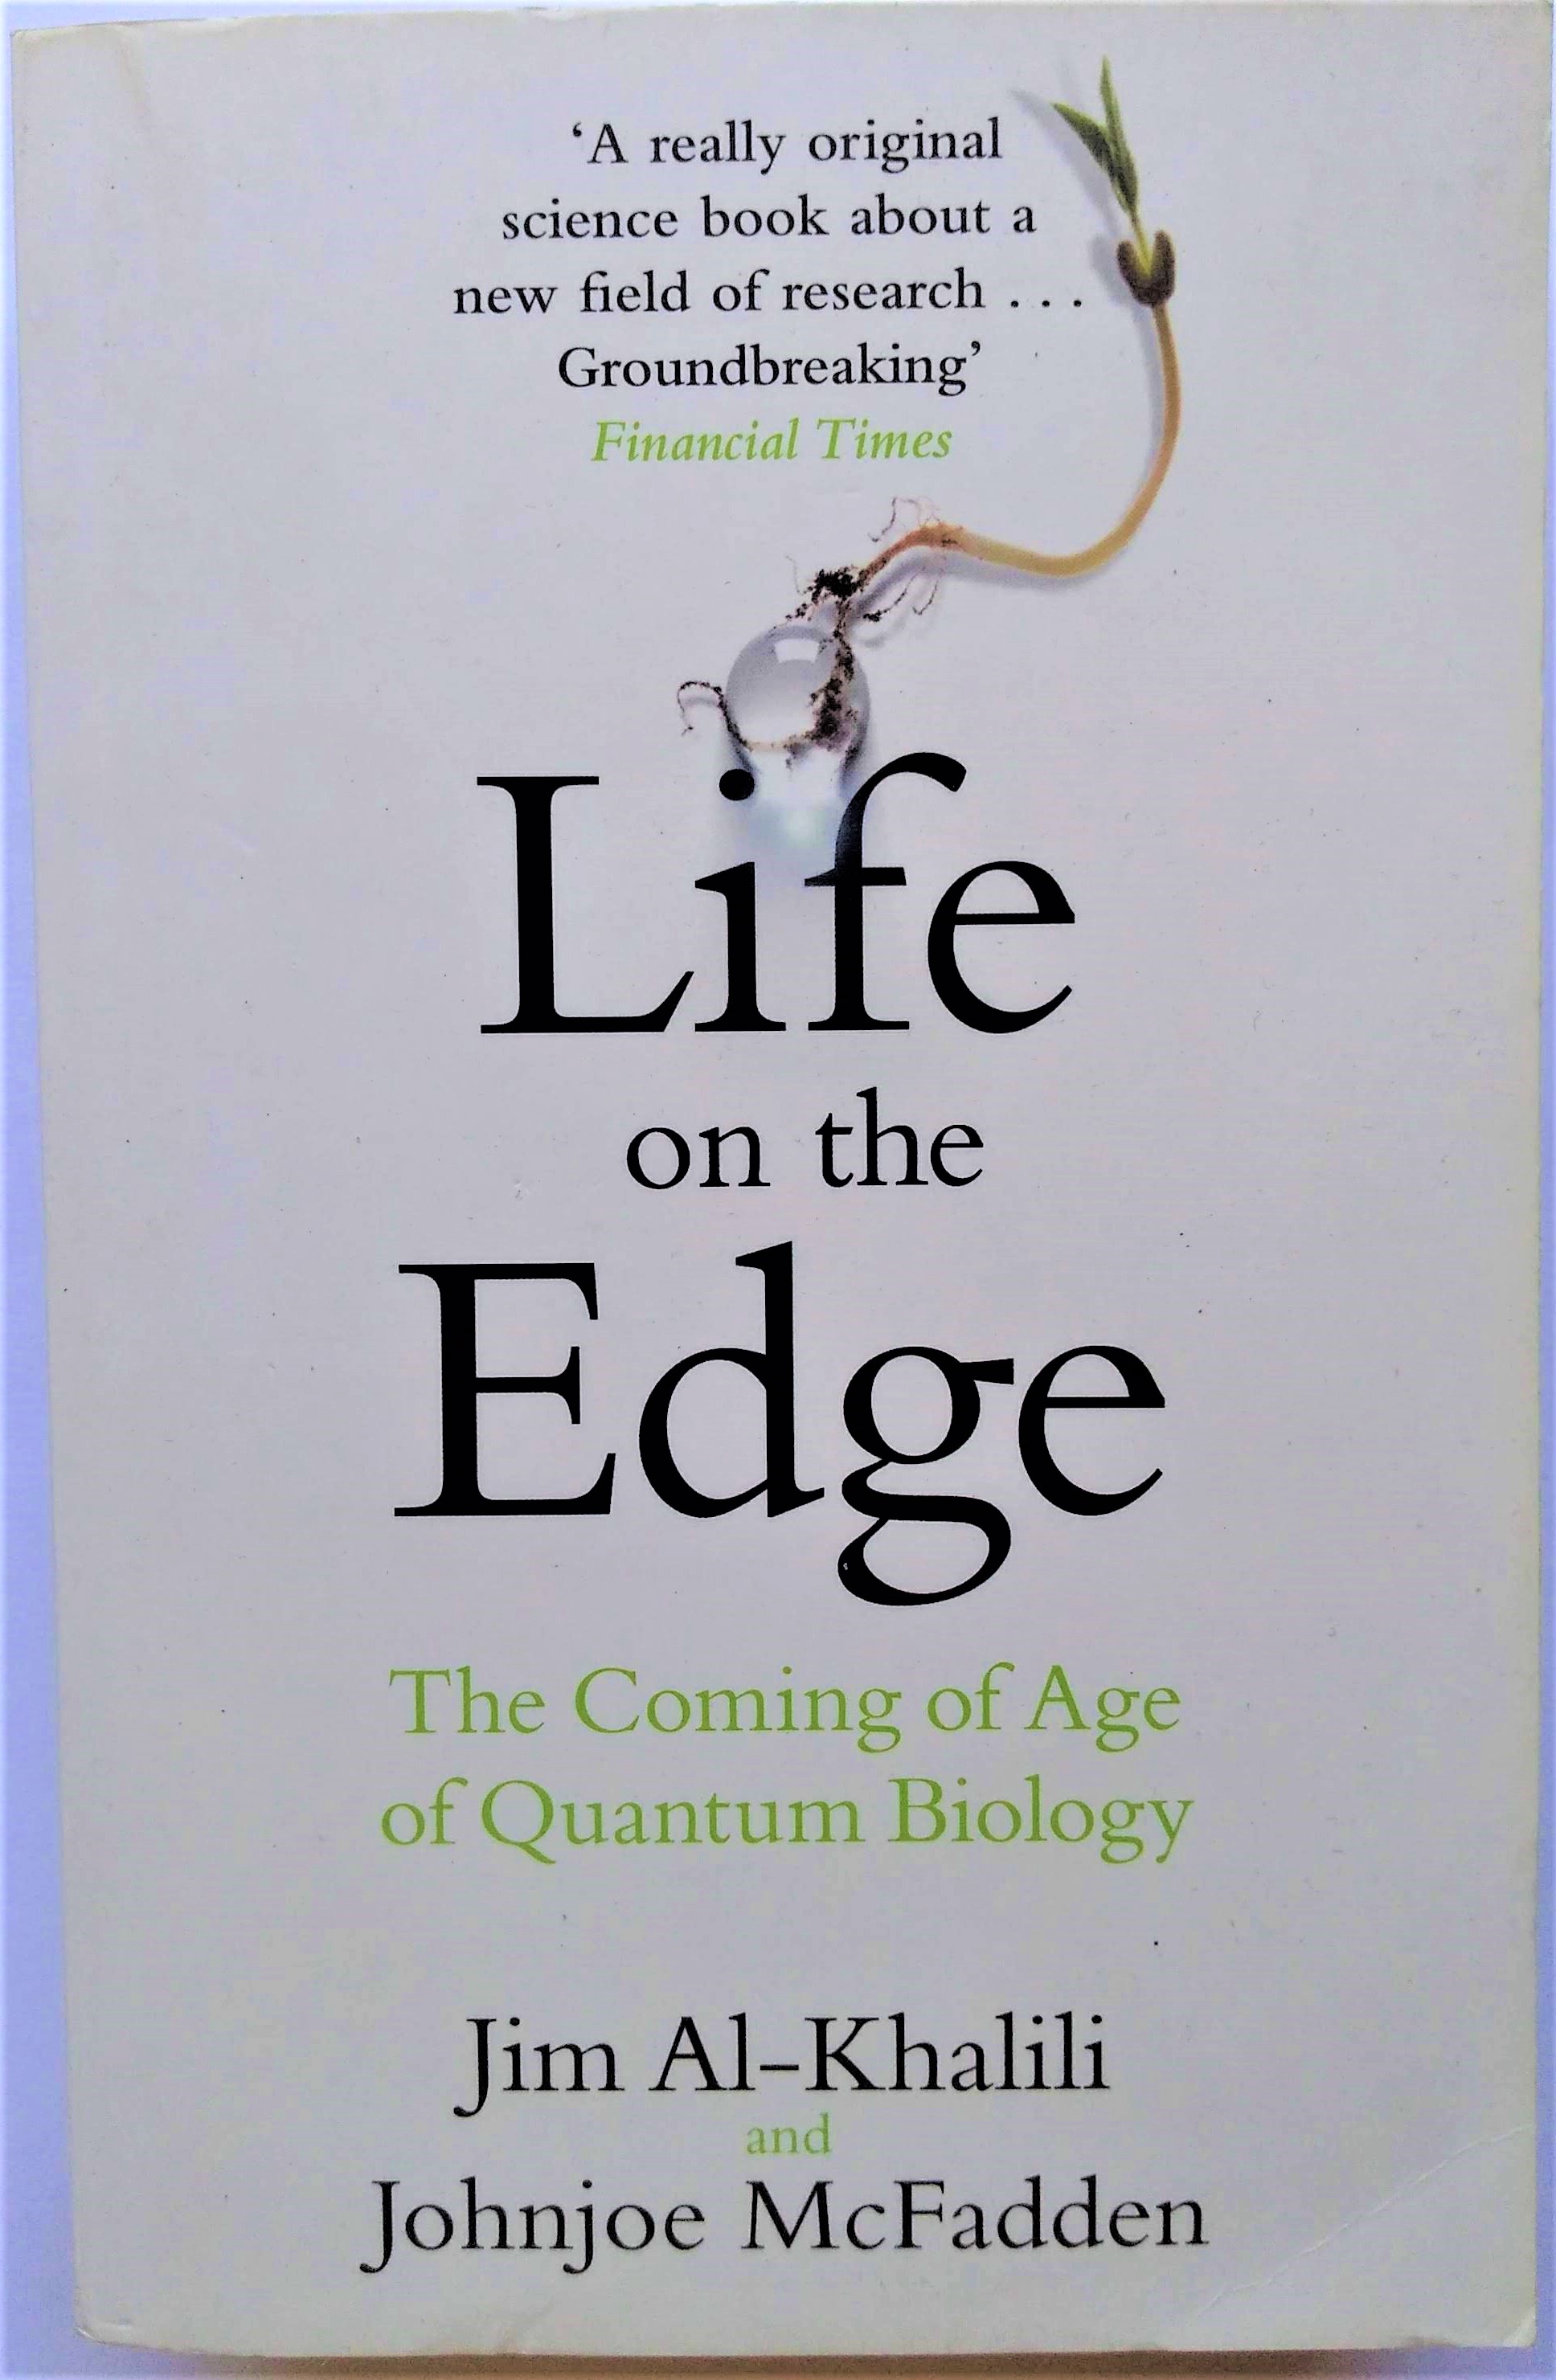 Life on the Edge. The Coming Age of Quantum Biology.